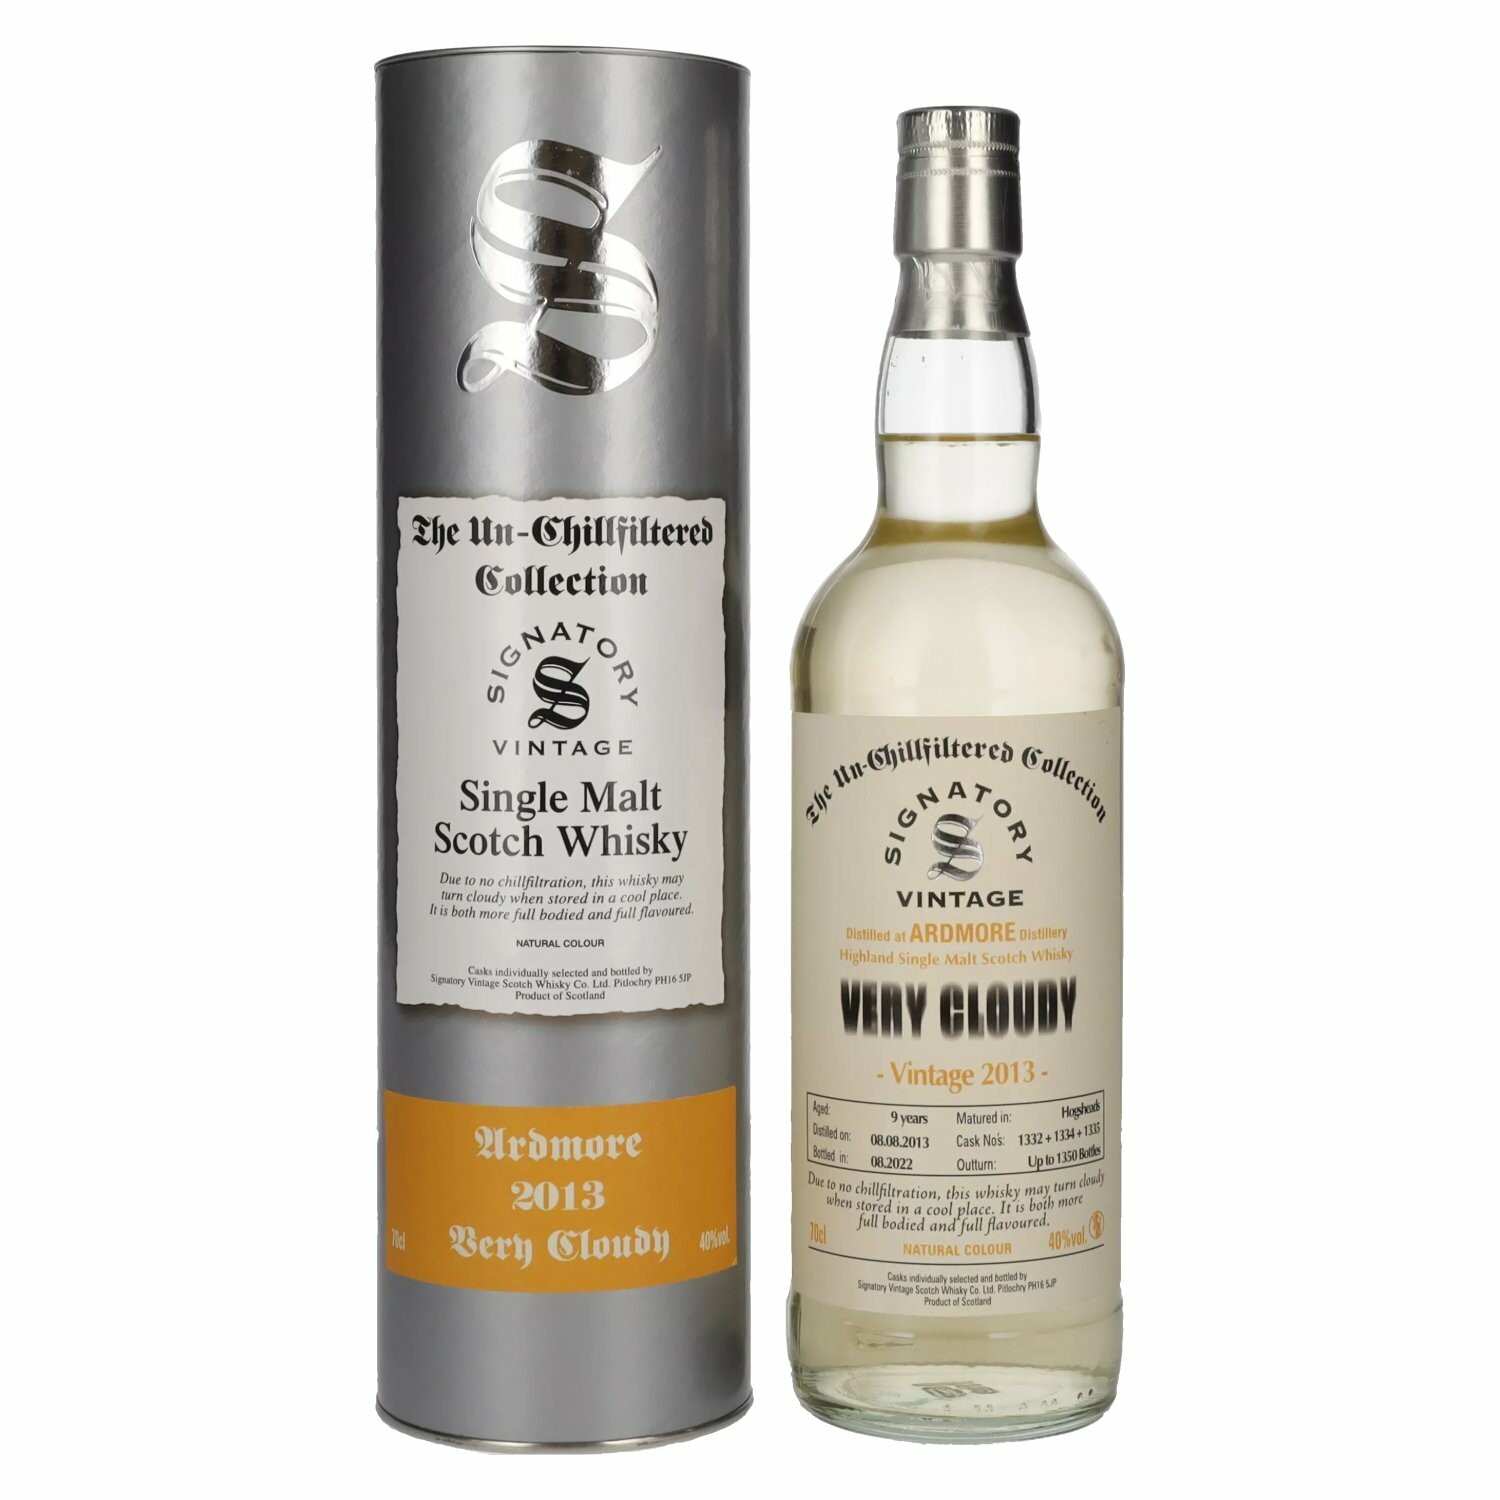 Signatory Vintage ARDMORE 9 Years Old VERY CLOUDY The Un-Chillfiltered 2013 40% Vol. 0,7l in Giftbox